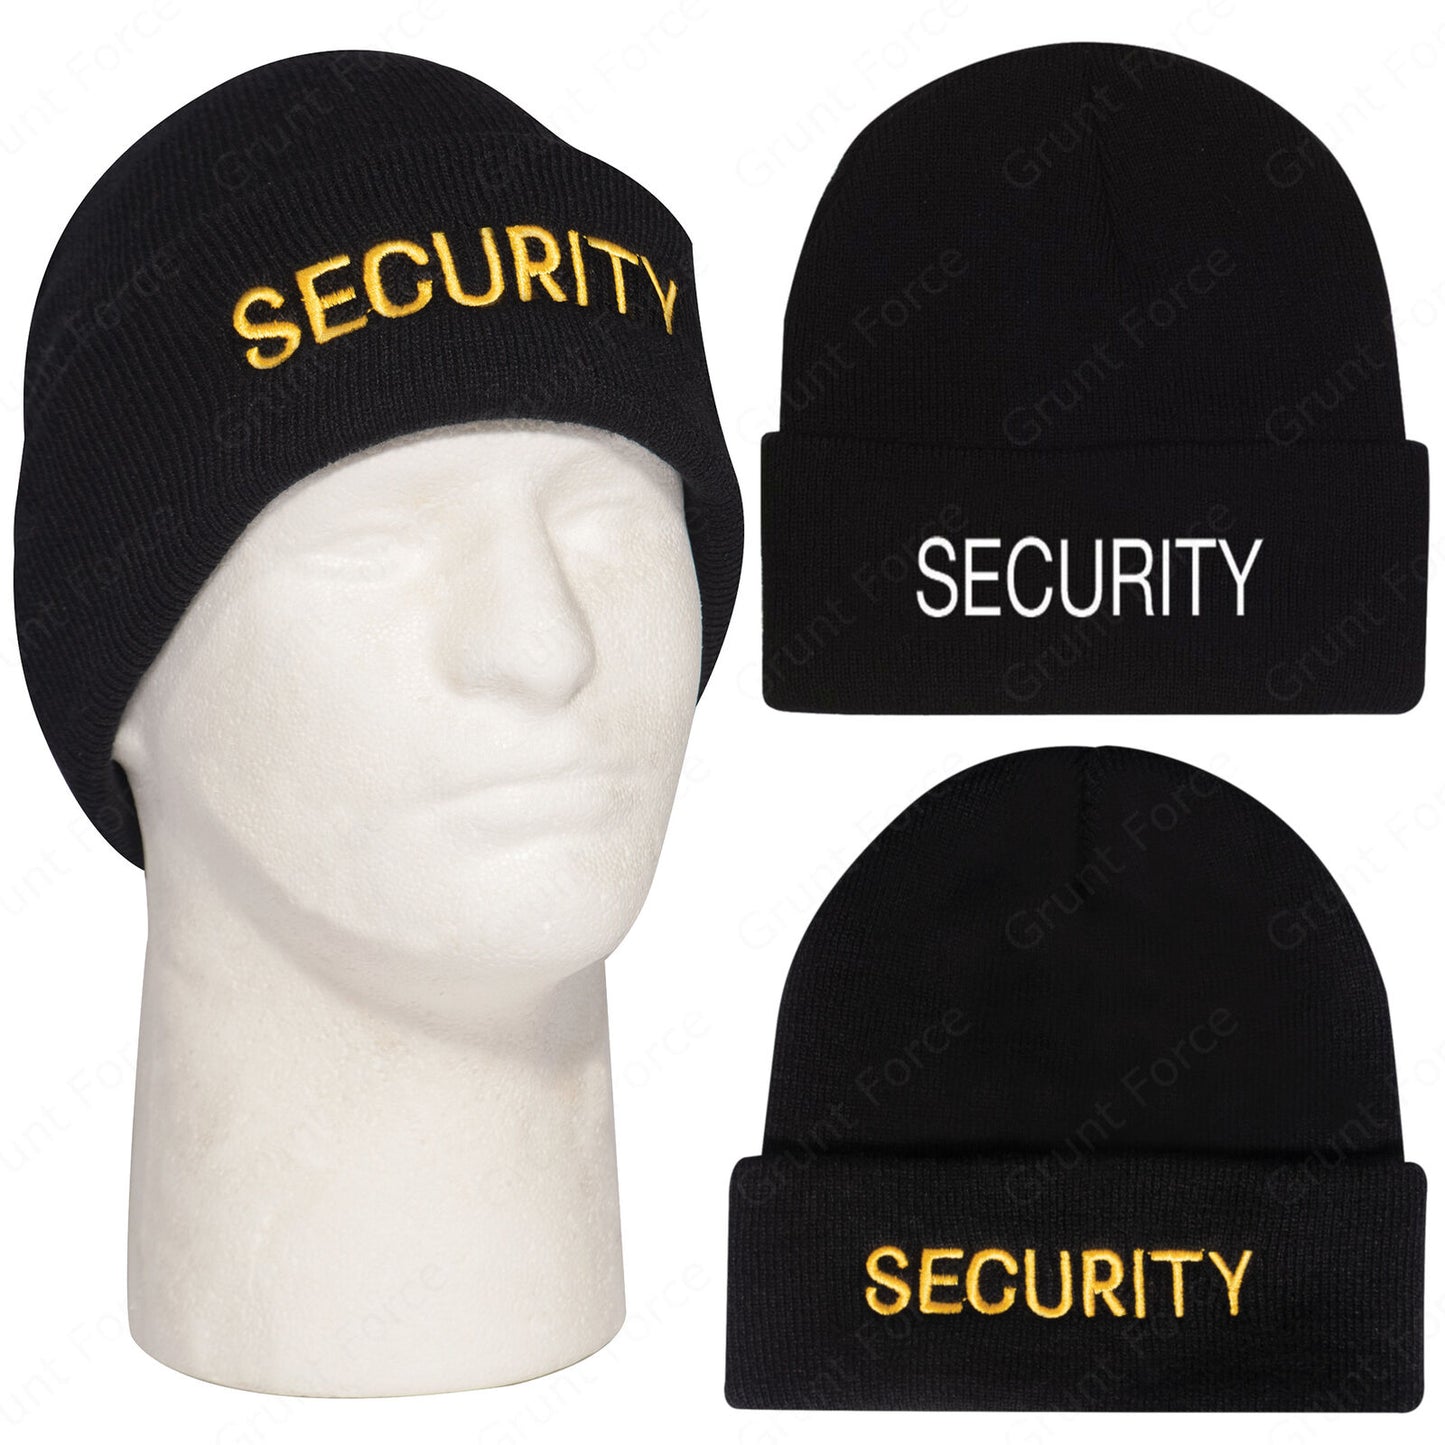 Black & Gold Embroidered SECURITY Watch Cap - Ski Hat Winter Hat 100% Acrylic